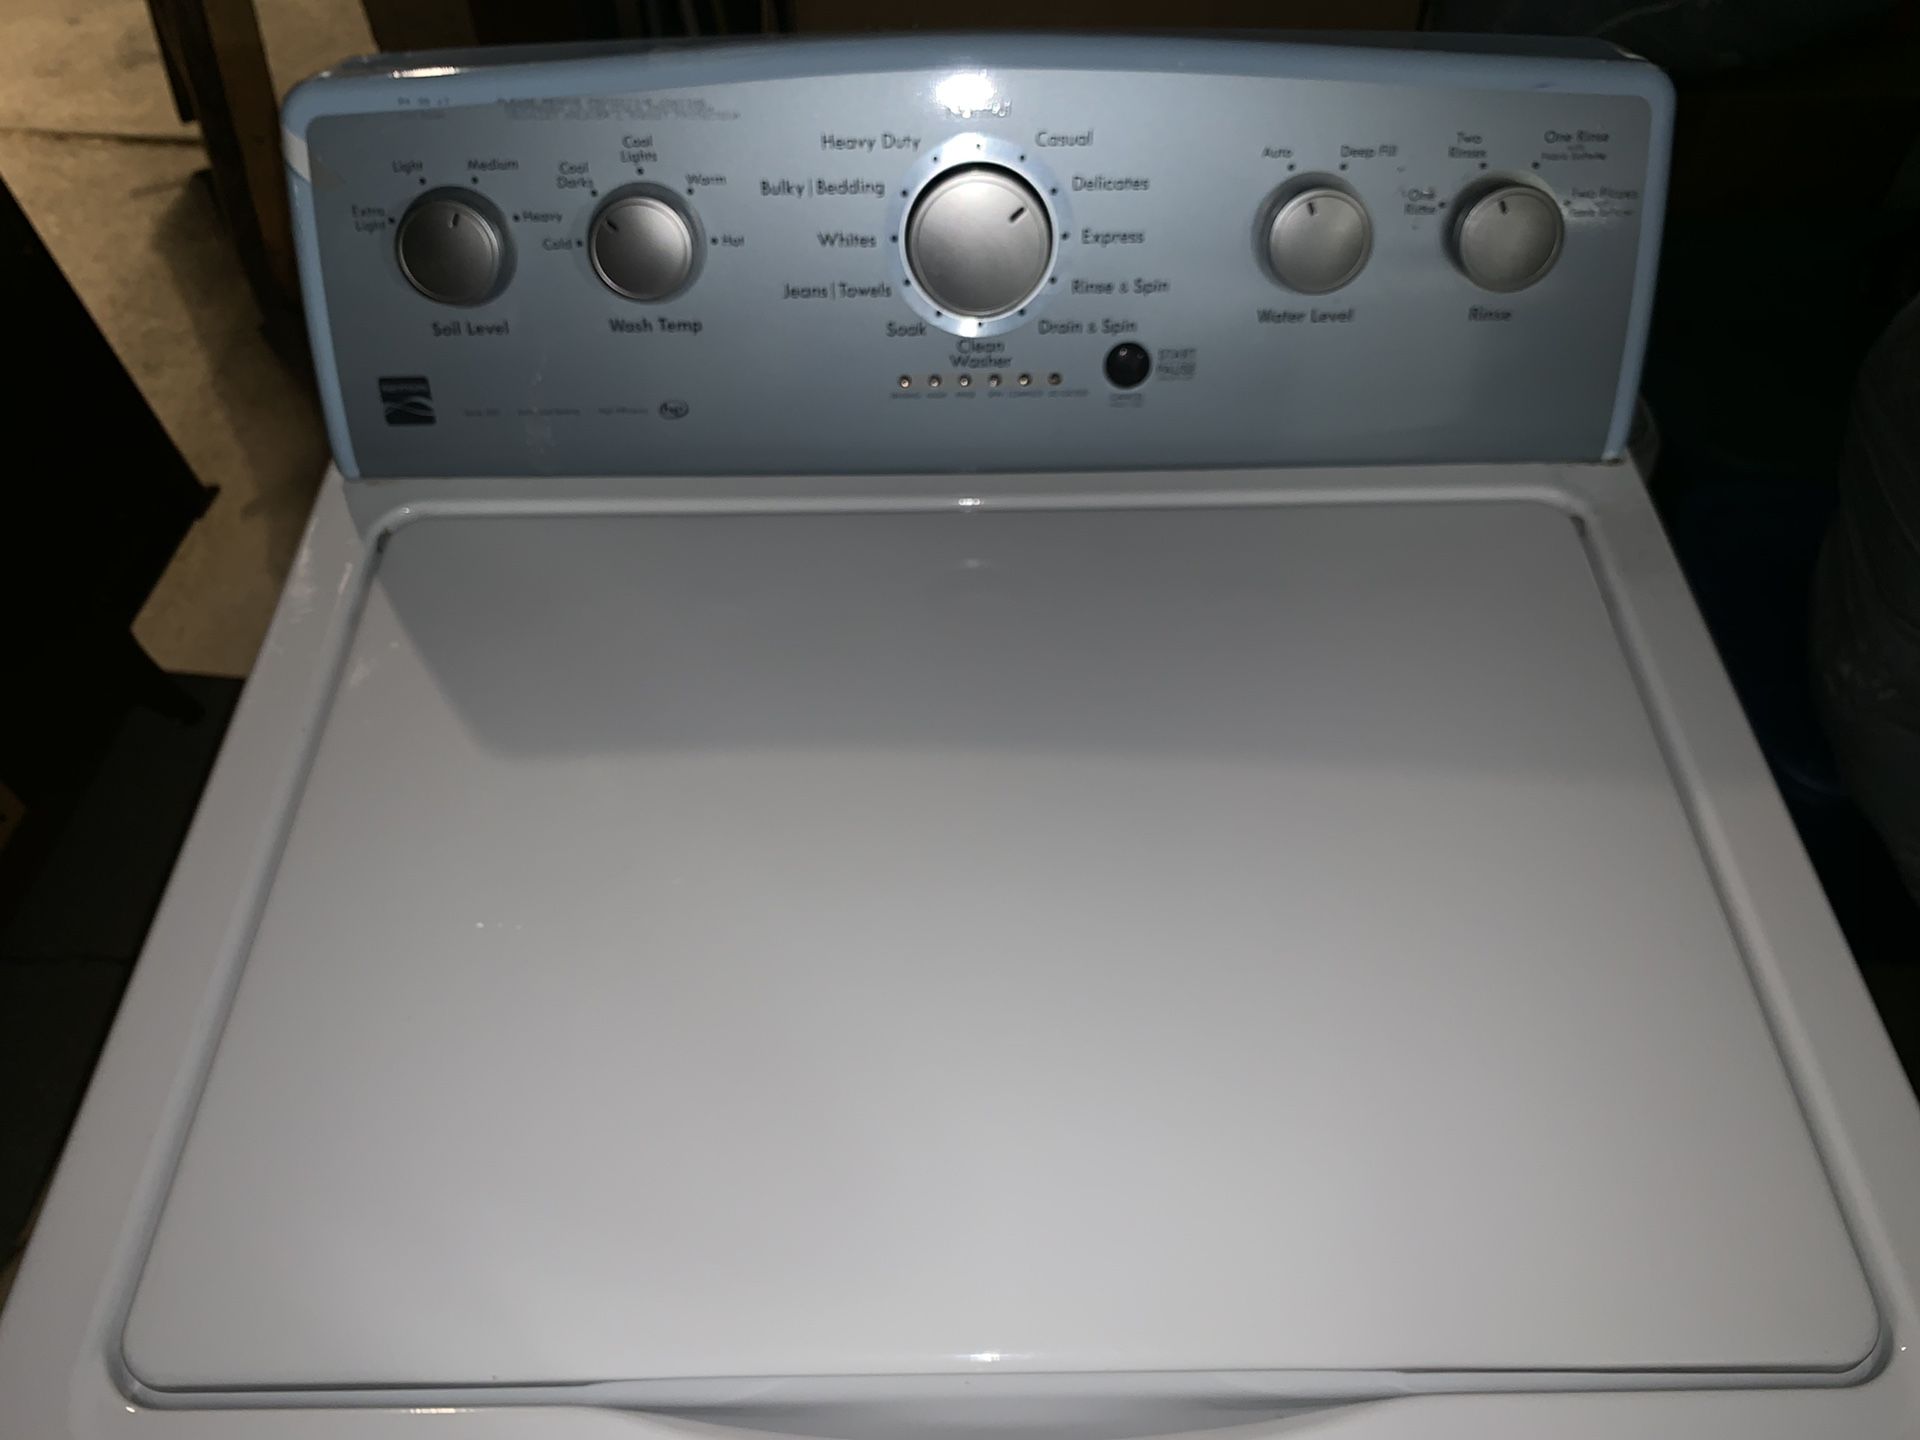 Kenmore Series 500 - 4.3 cu. ft. Top Load Washer